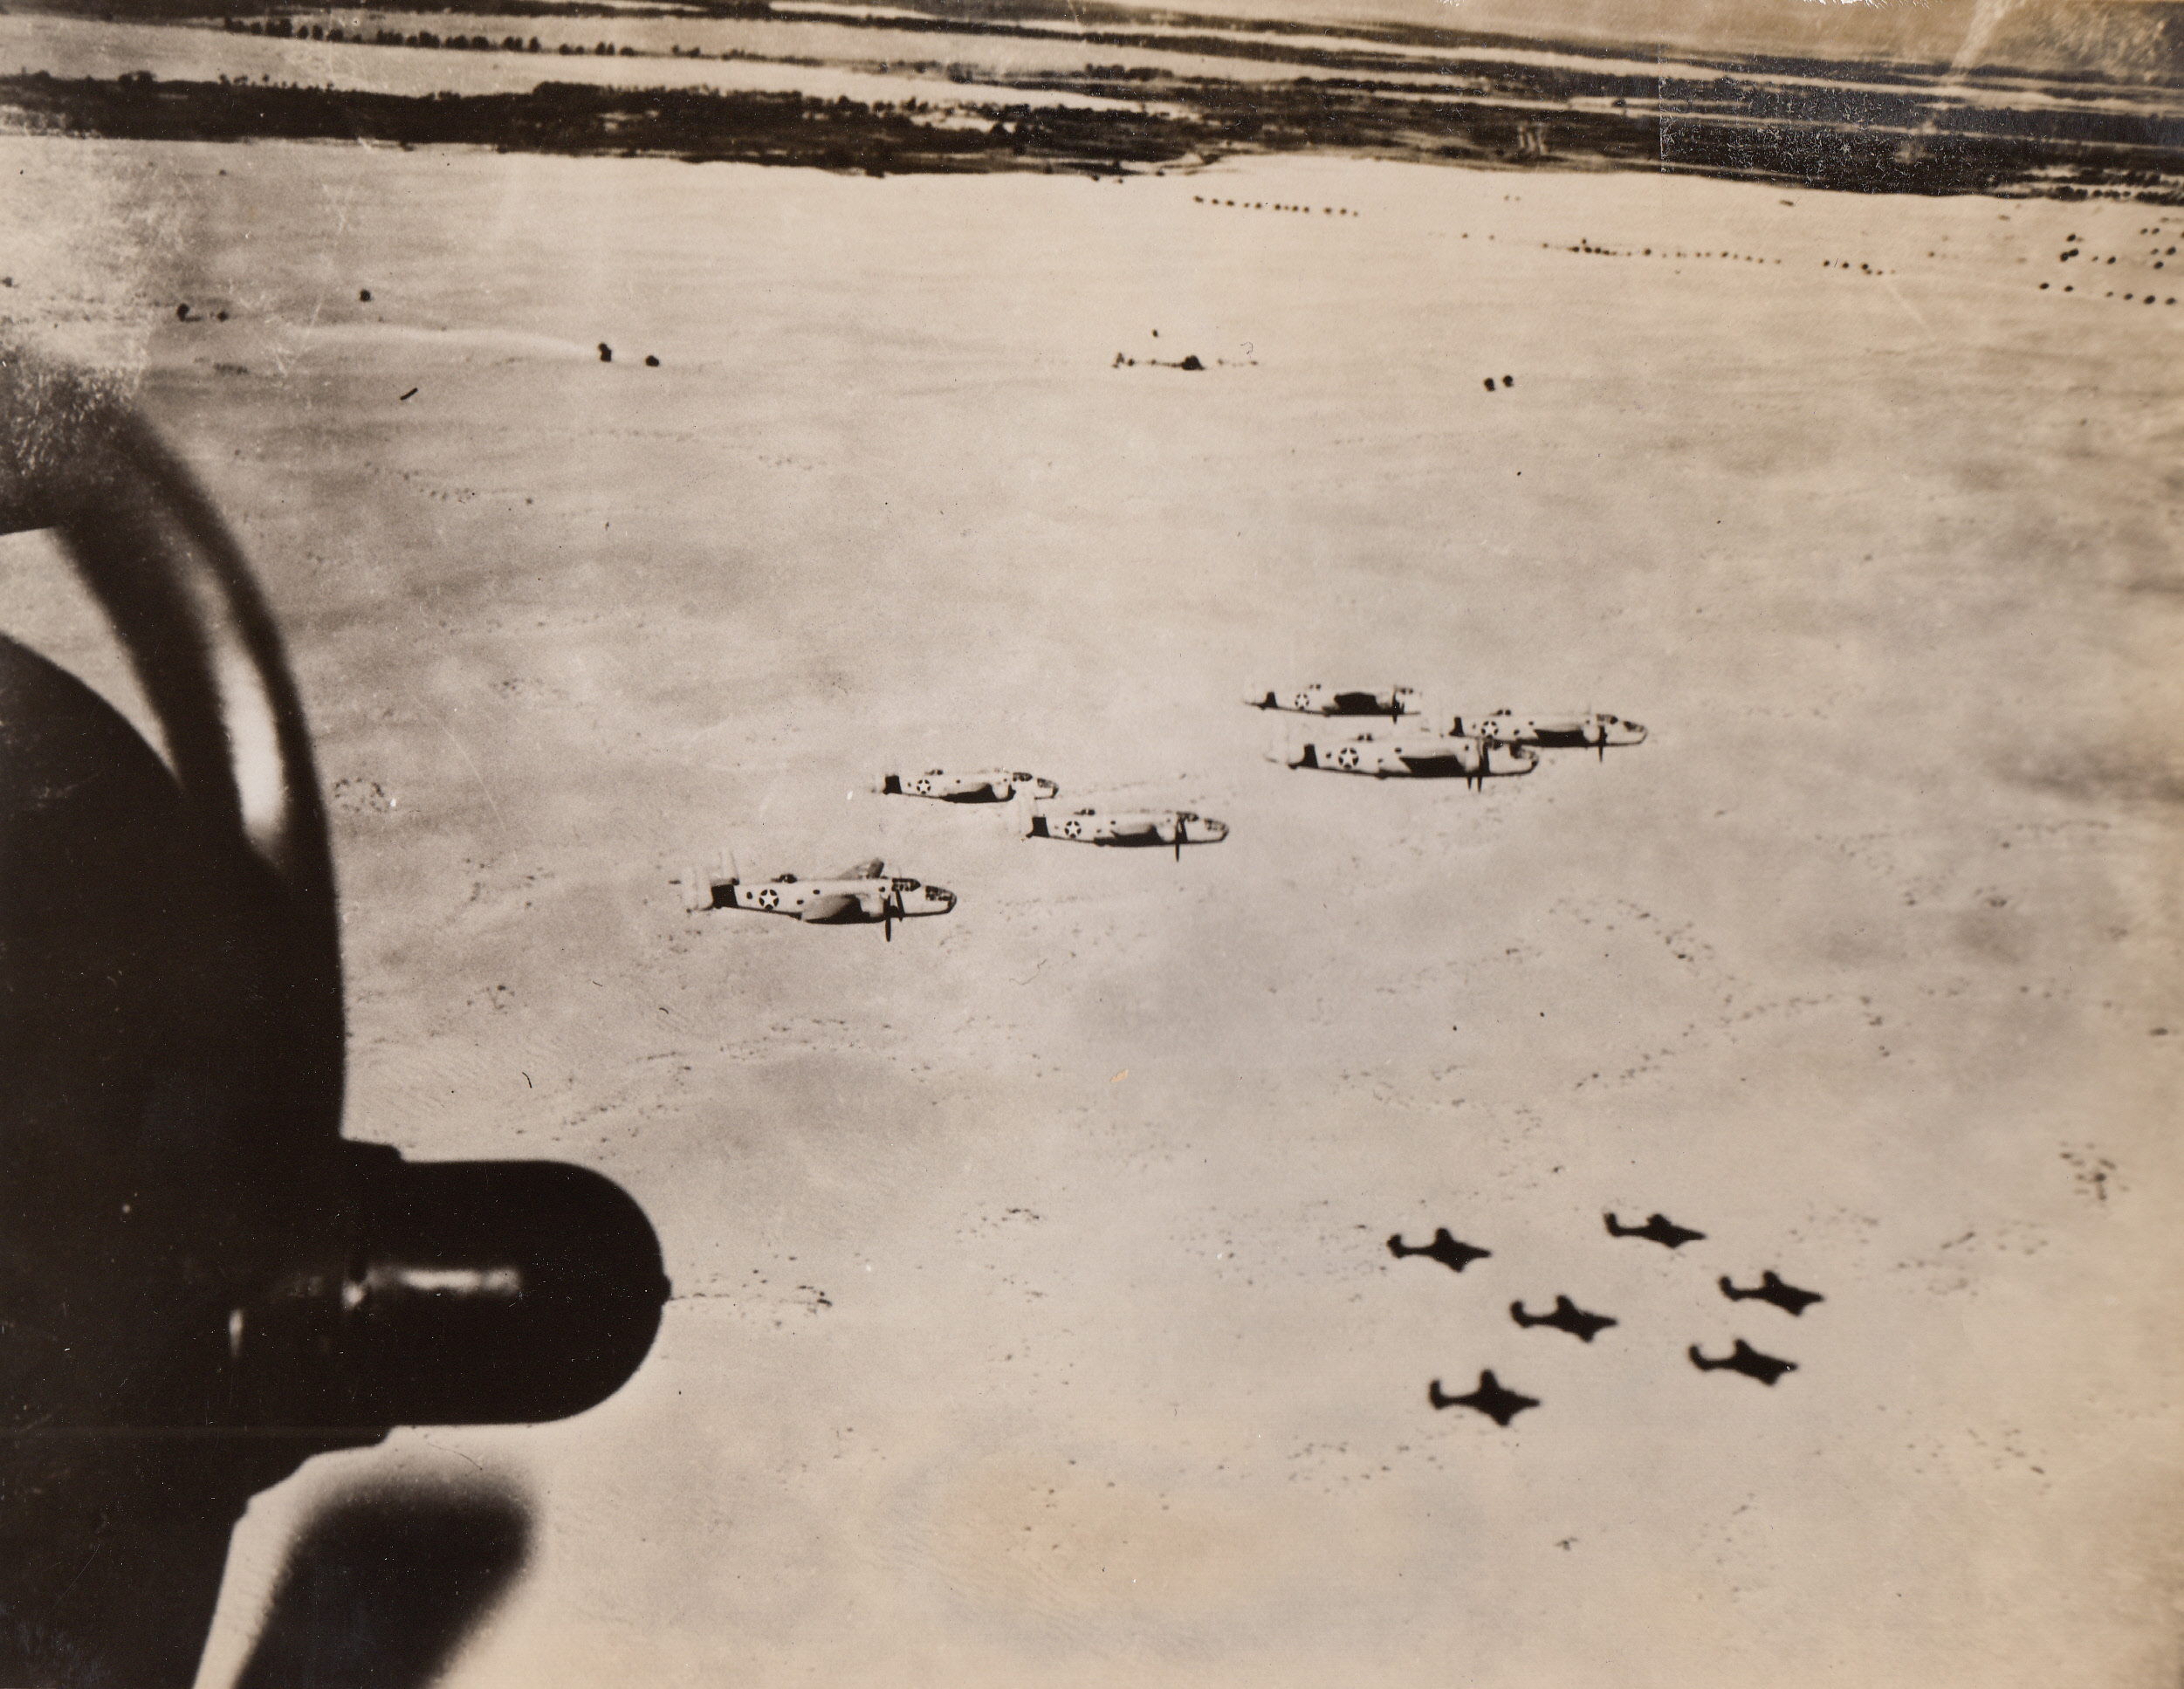 American Planes Over African Desert, 9/12/1943. Middle East – Medium bombers of the U.S. Army Air Force fly in formation over the bleak desert in the Middle East, where they are harrying the supply lines and bases of the axis.  The planes are camouflaged so as to blend with the color of the desert, but there is no way of erasing the sharp shadows.;